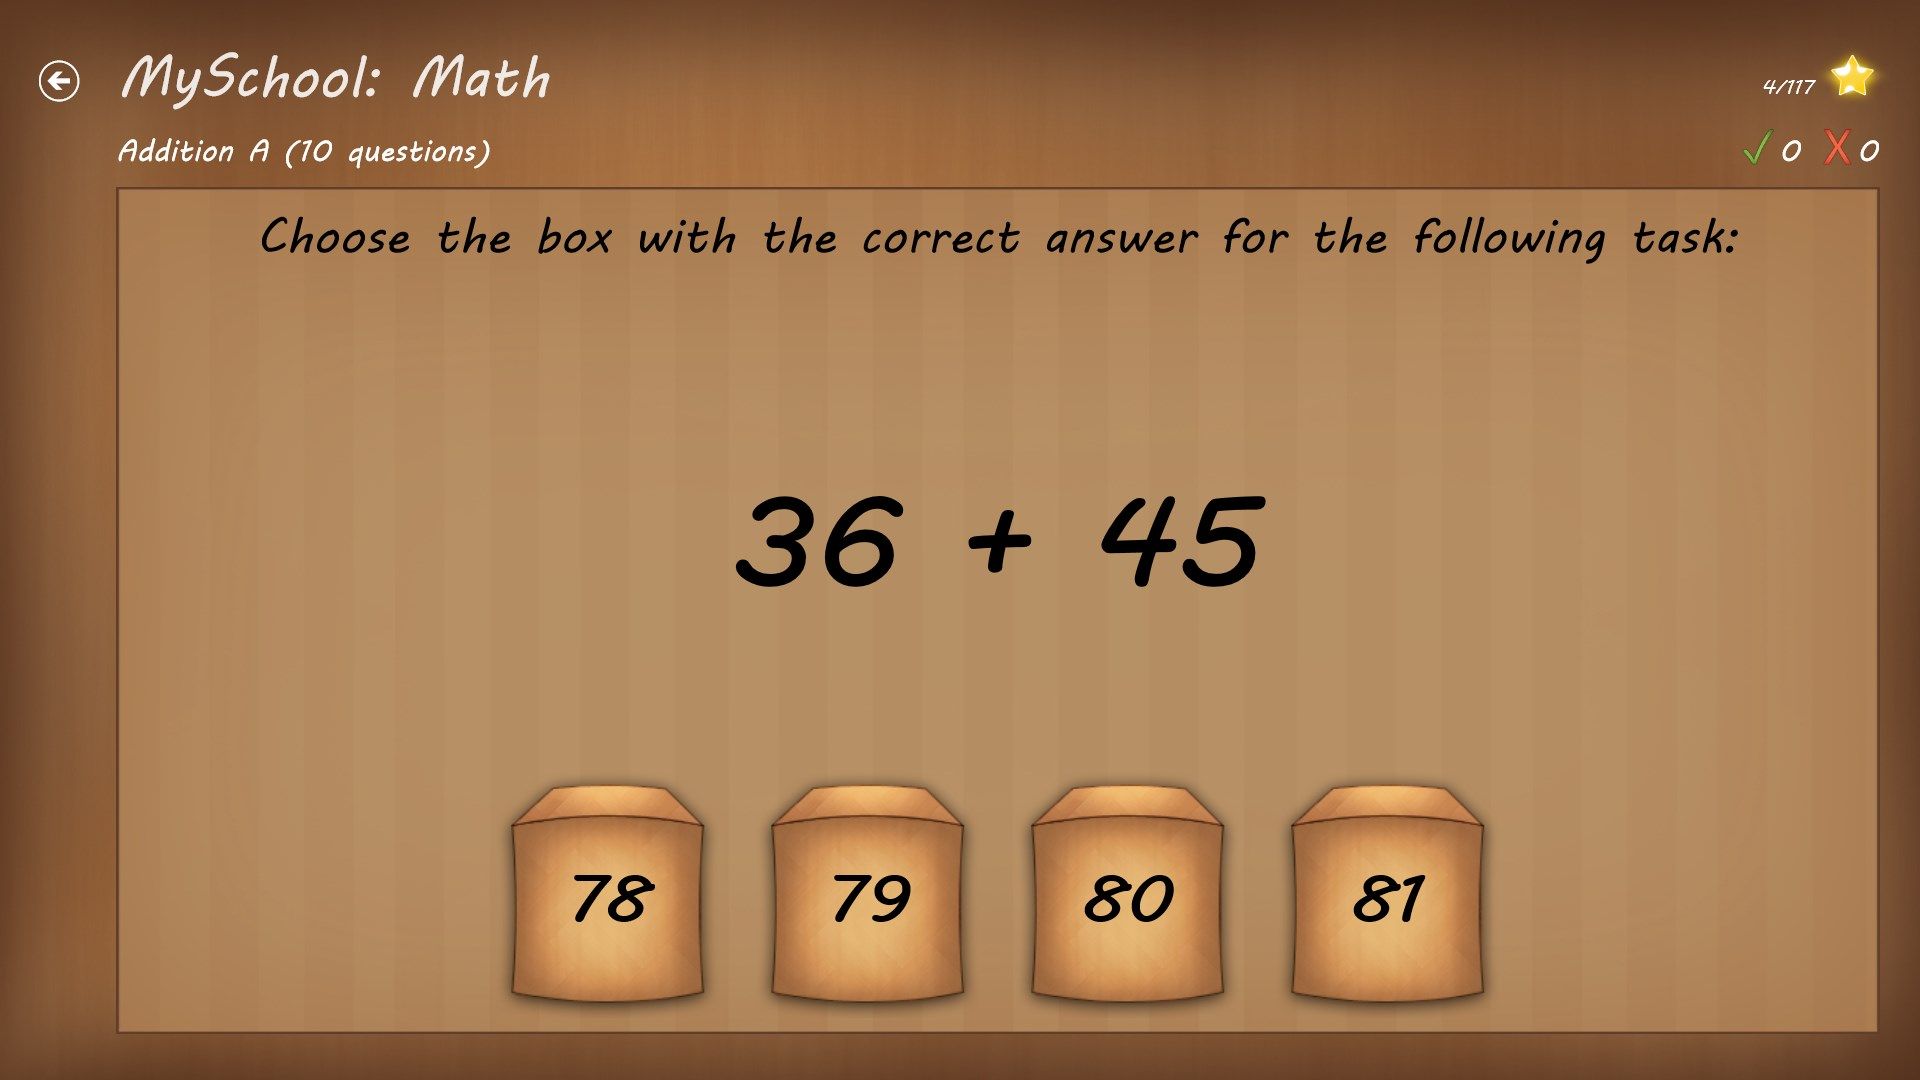 A task example with simple addition.